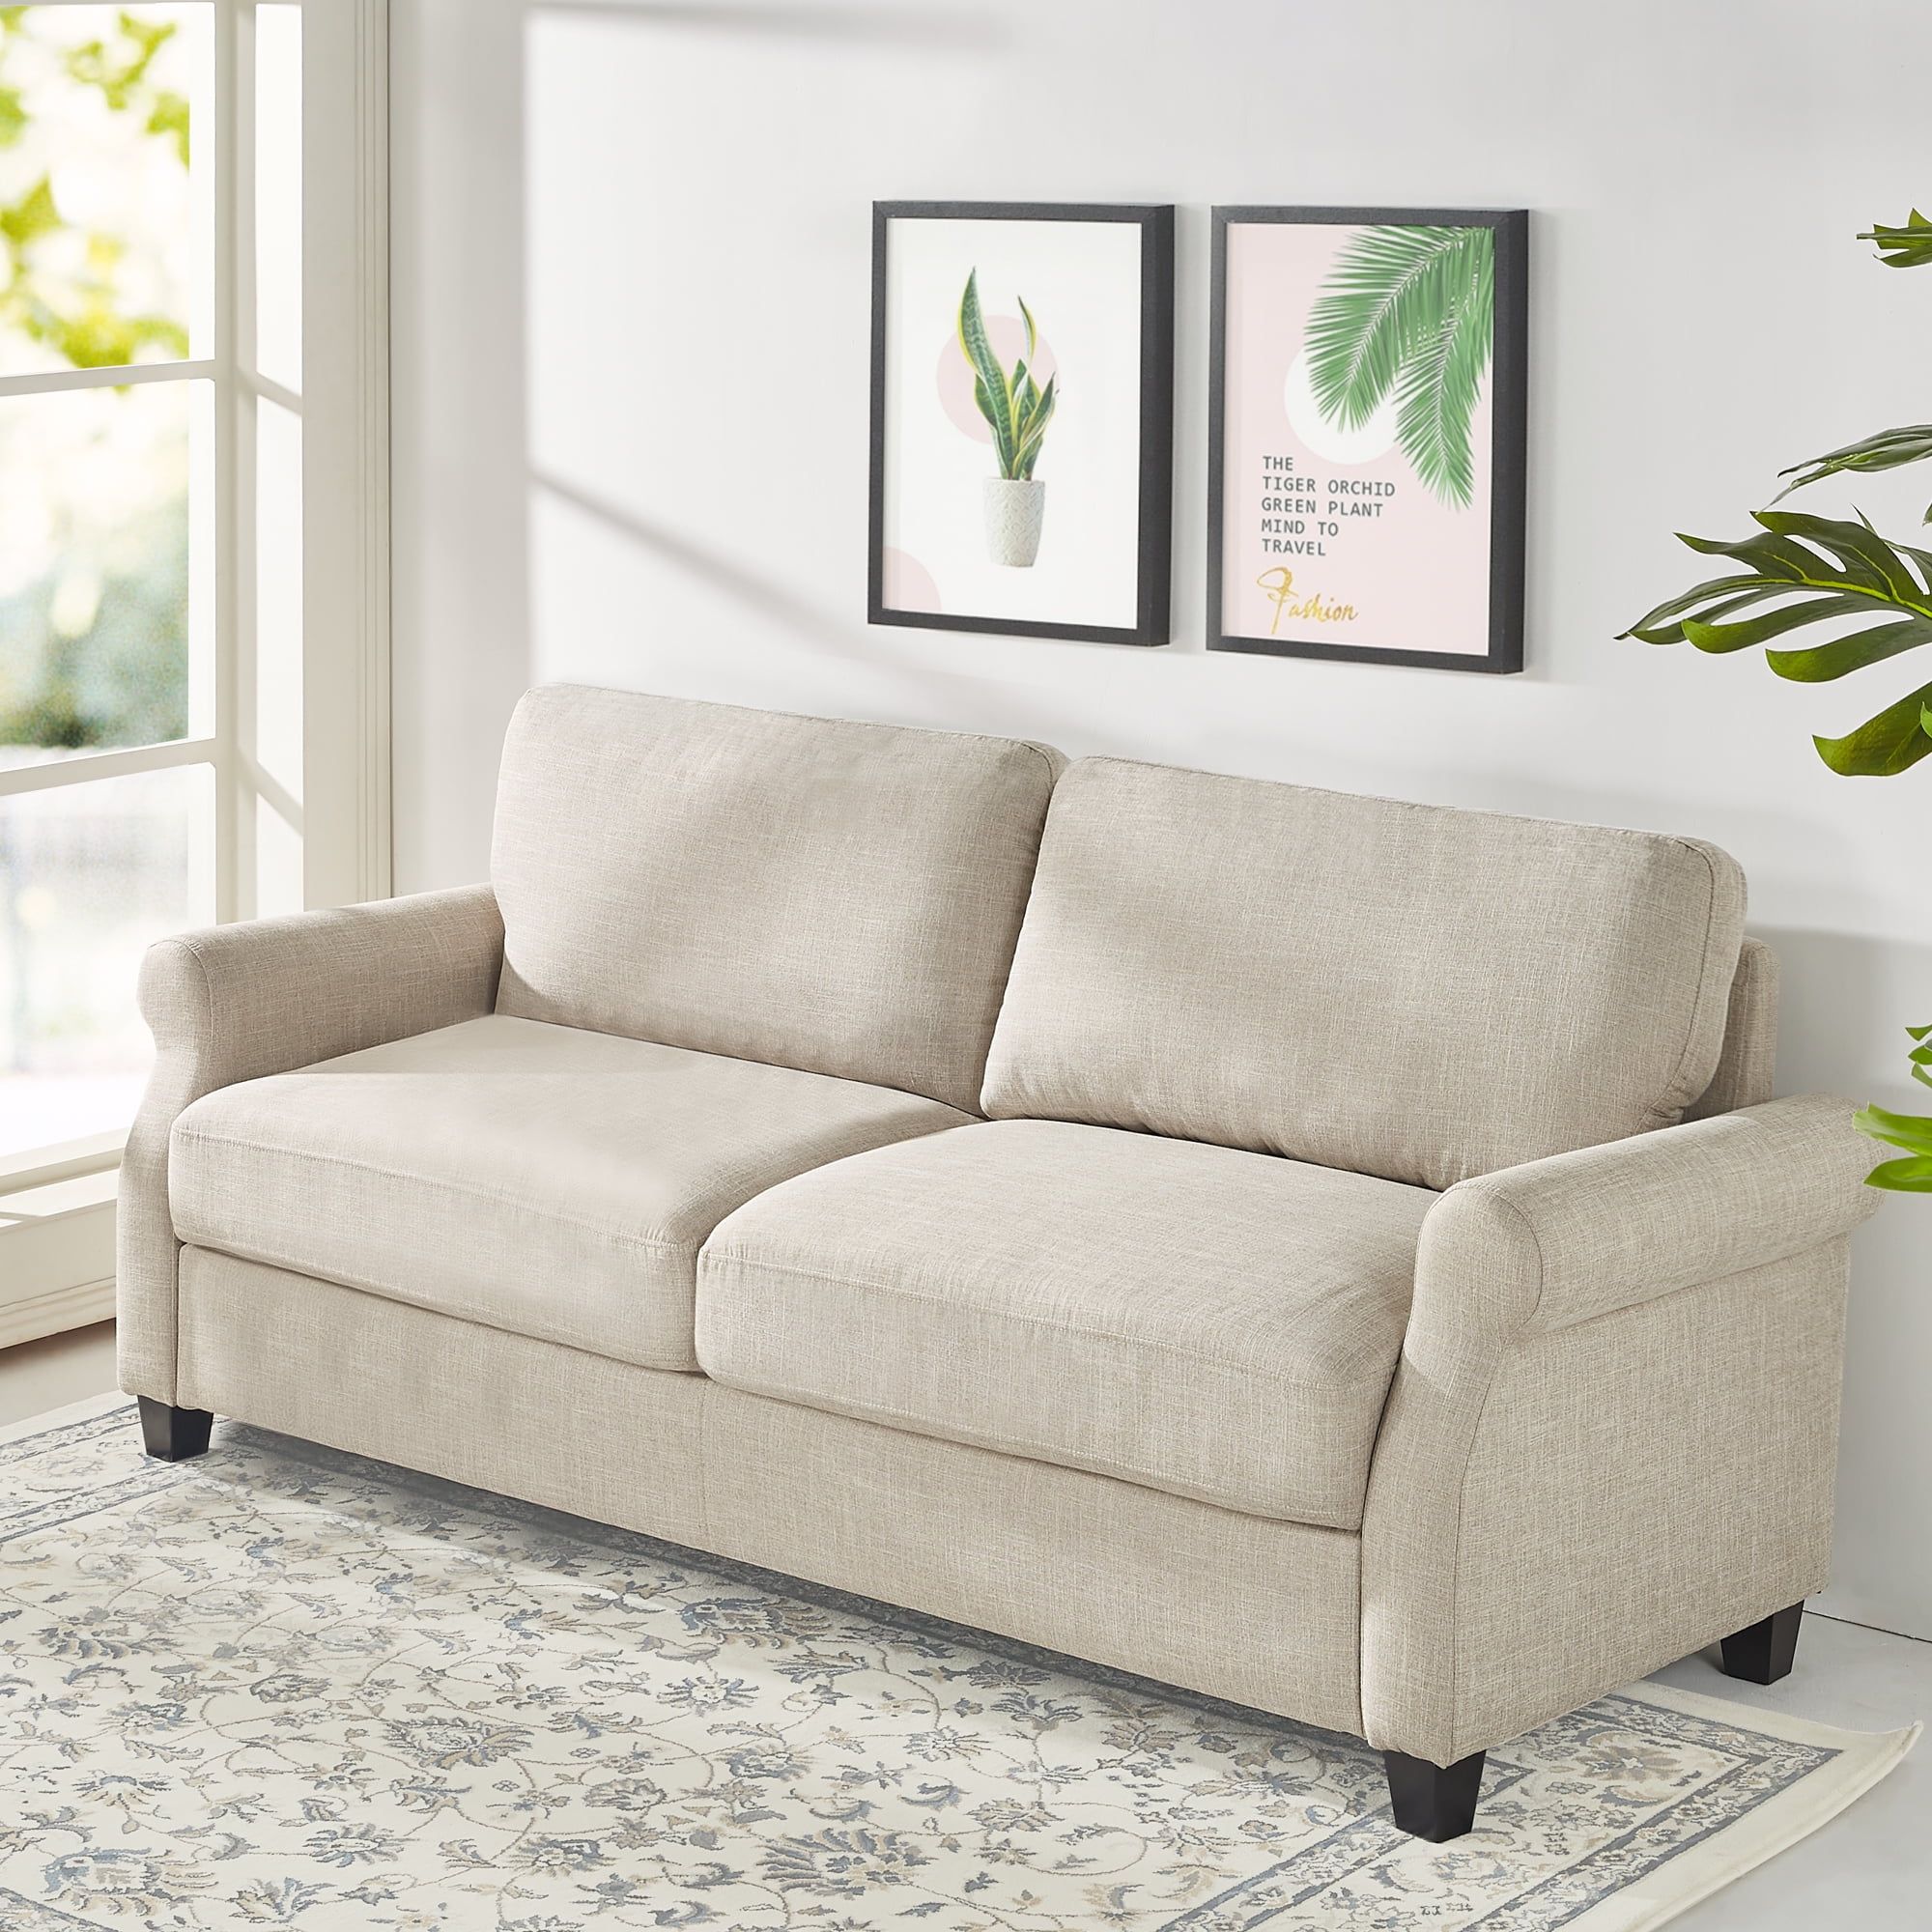 Woven Paths Josh Sofa Couch, Beige Fabric – Walmart Inside Sofas In Beige (View 2 of 15)